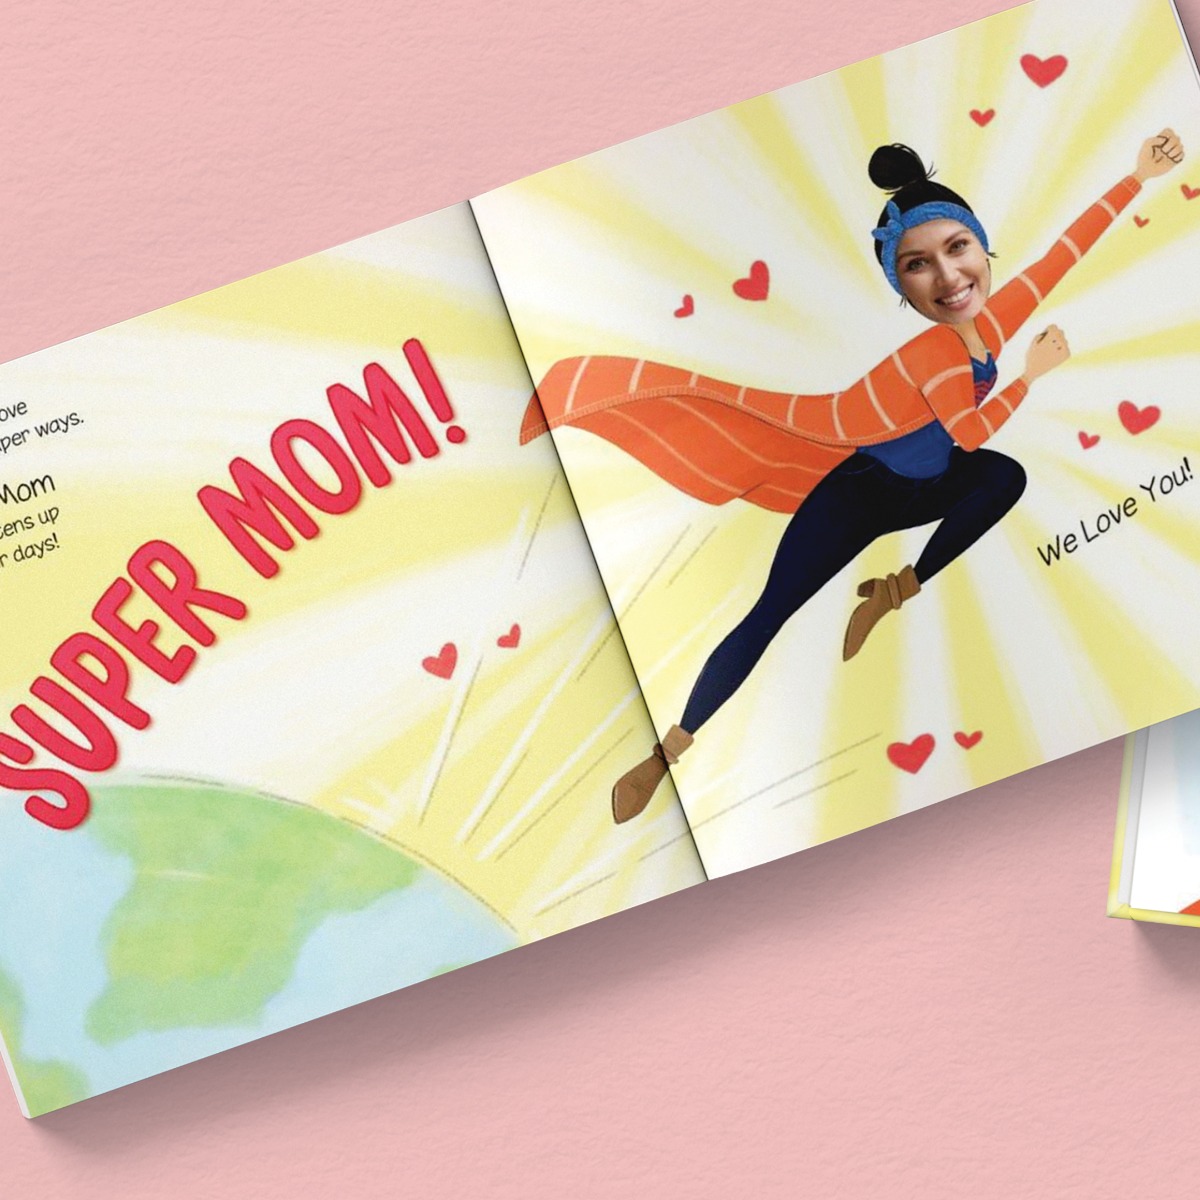 Super Mom! Personalized Book and Color-Changing Mug Gift Set